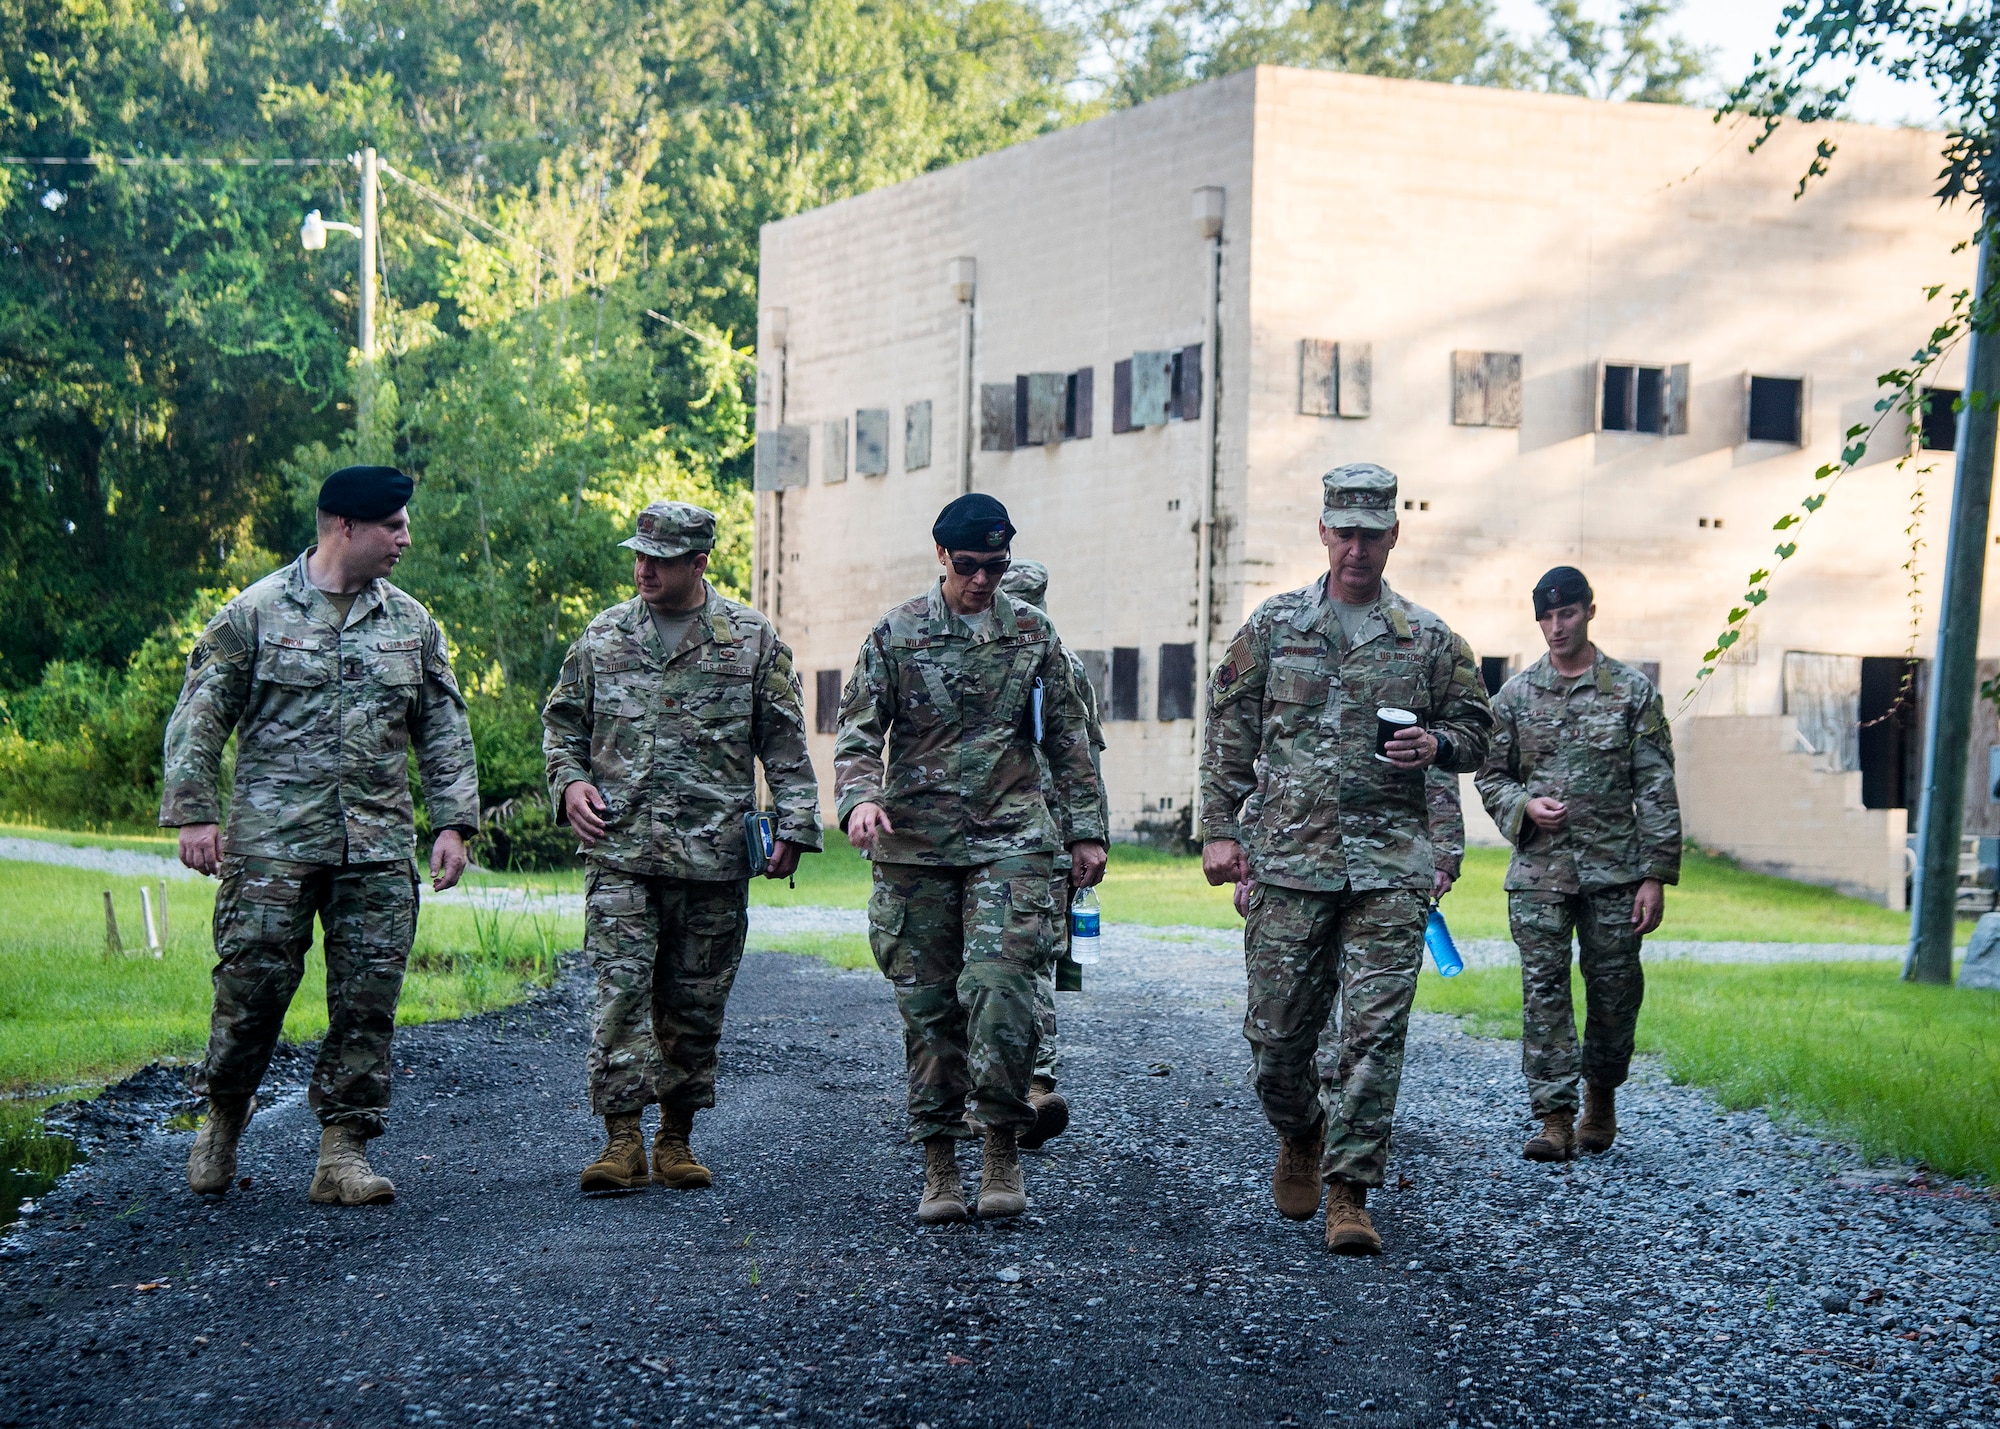 Leadership from the 93d Air Ground Operations Wing, briefs U.S. Air Force Maj. Gen Chad Franks, right, Ninth Air Force commander, Aug. 9, 2019, at Moody Air Force Base, Ga. Franks, who on separate occasions served as the commander for the 23d Wing and 347th Rescue Group, is a command pilot with more than 3,300 hours in multiple aircraft including HC-130J Combat King II and HH-60G Pave Hawk. (U.S. Air Force photo by Airman 1st Class Eugene Oliver)